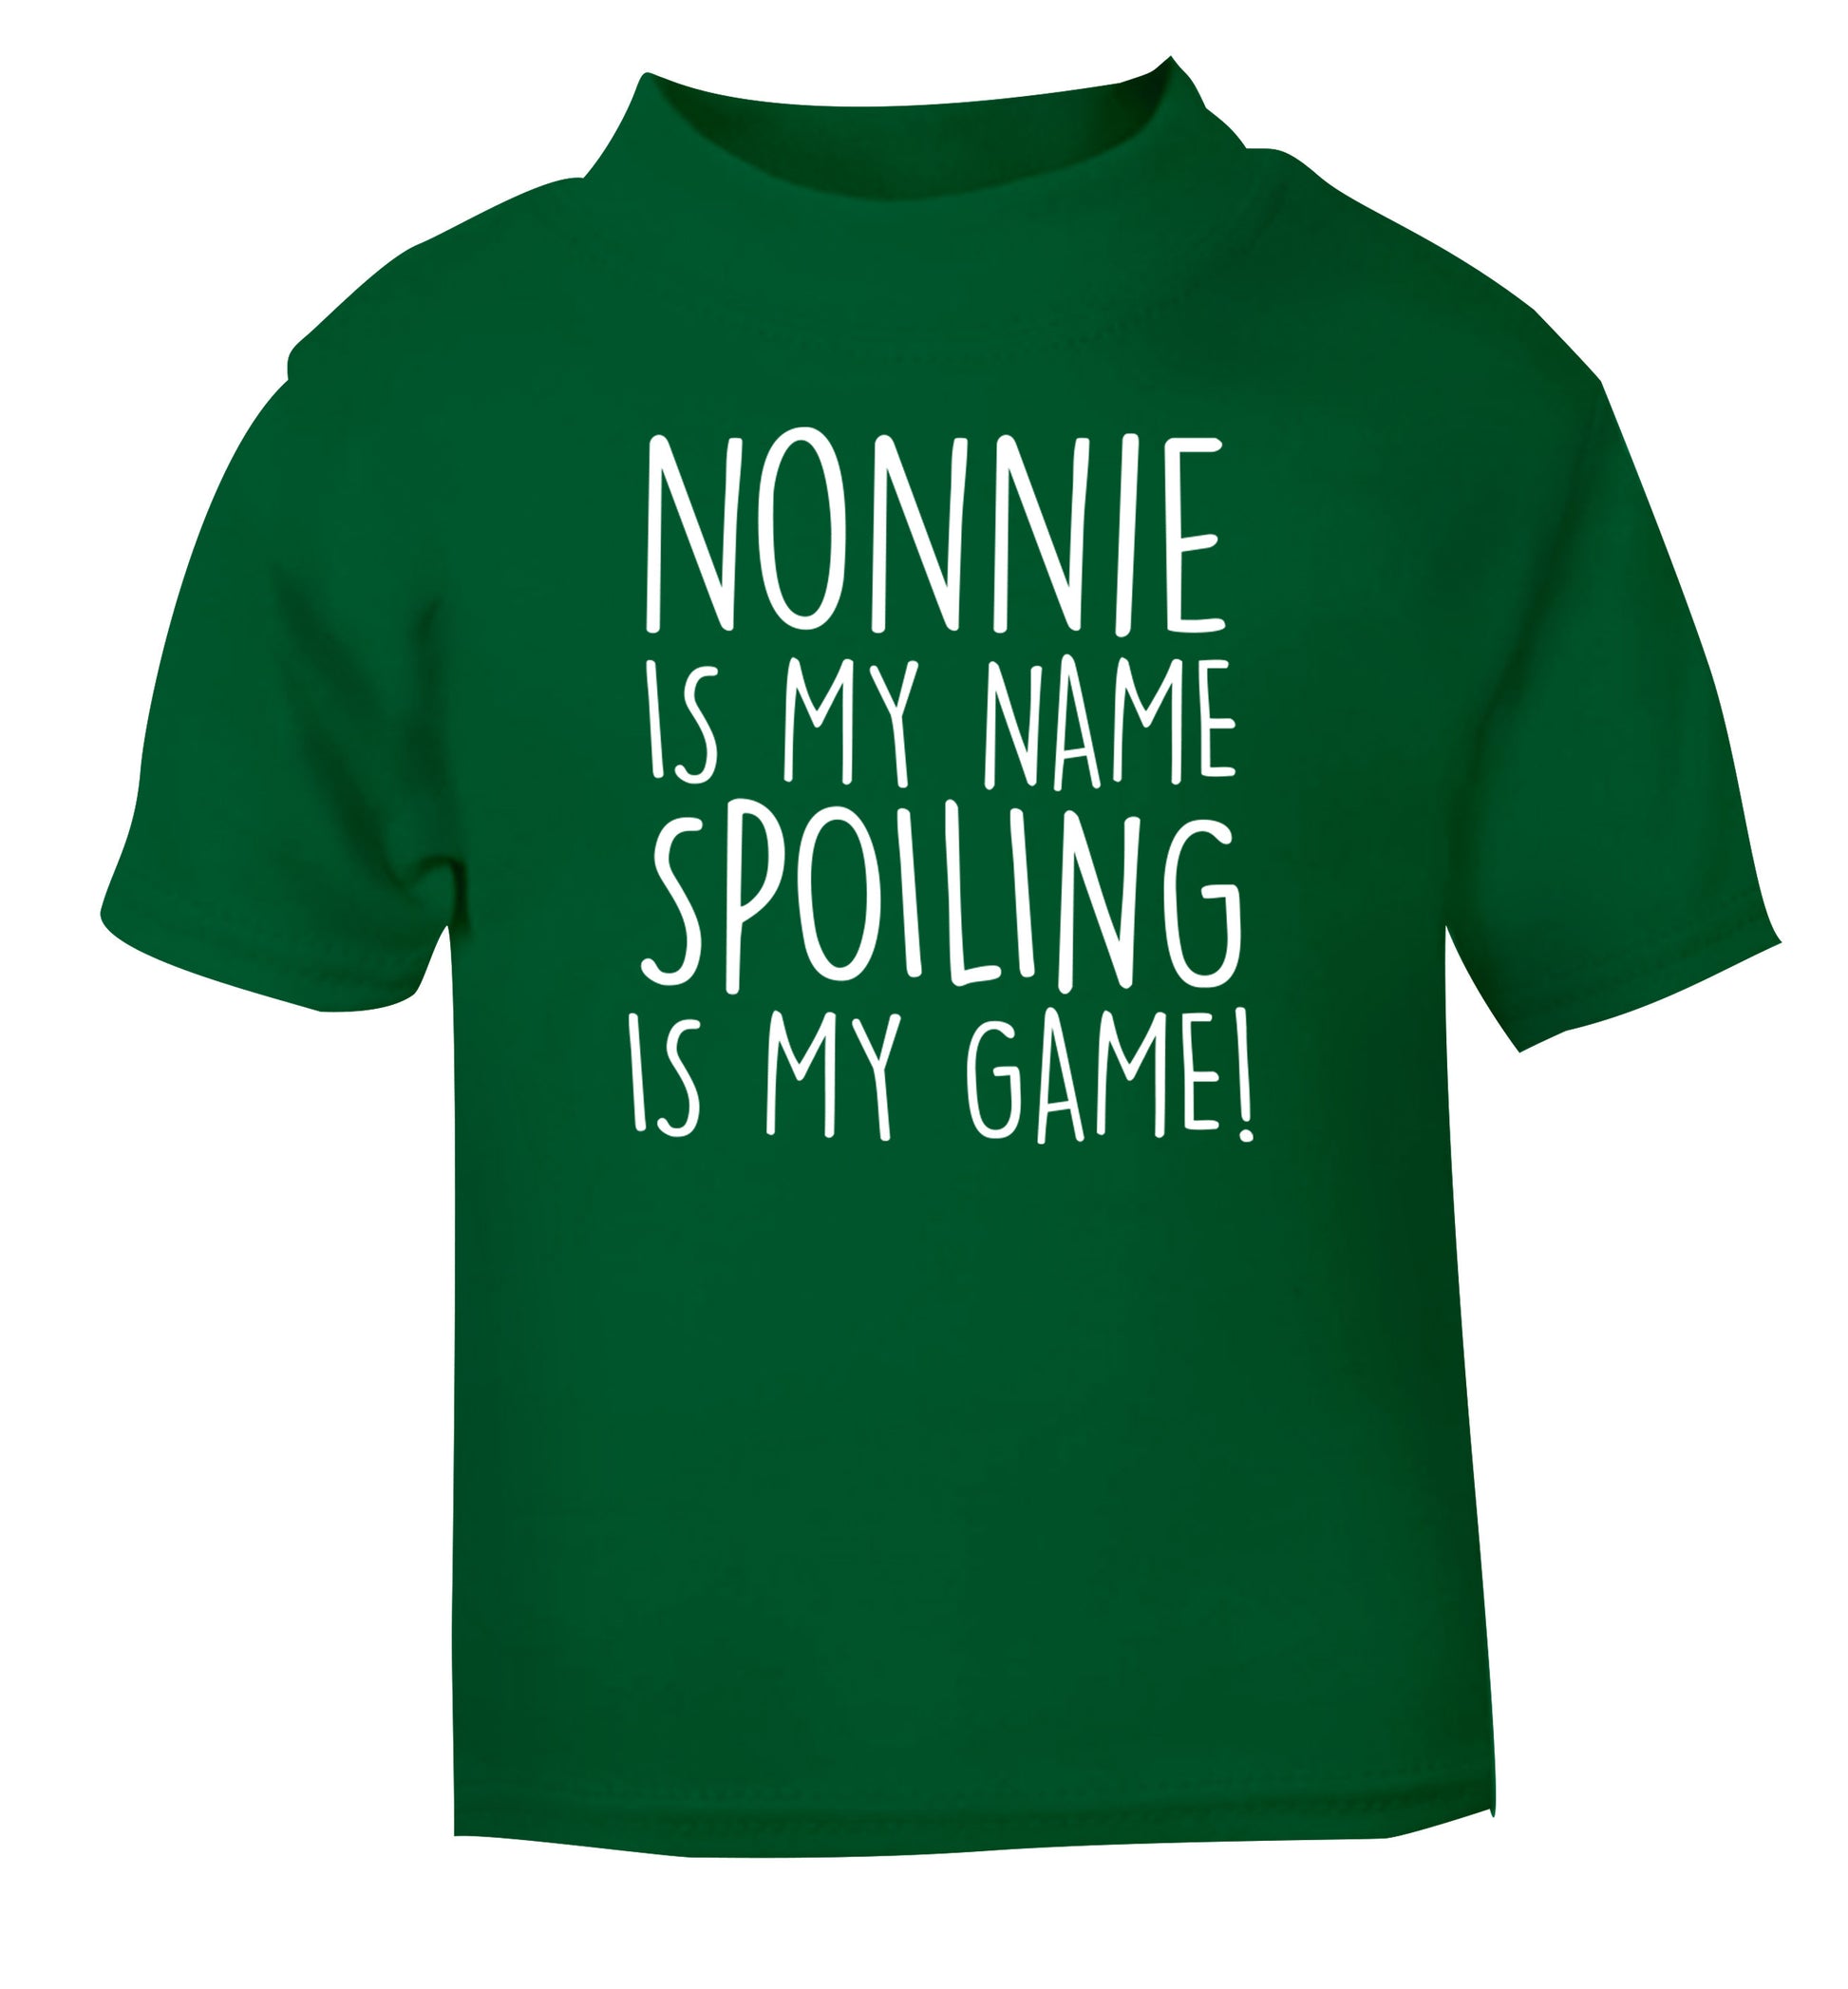 Nonnie is my name, spoiling is my game green Baby Toddler Tshirt 2 Years